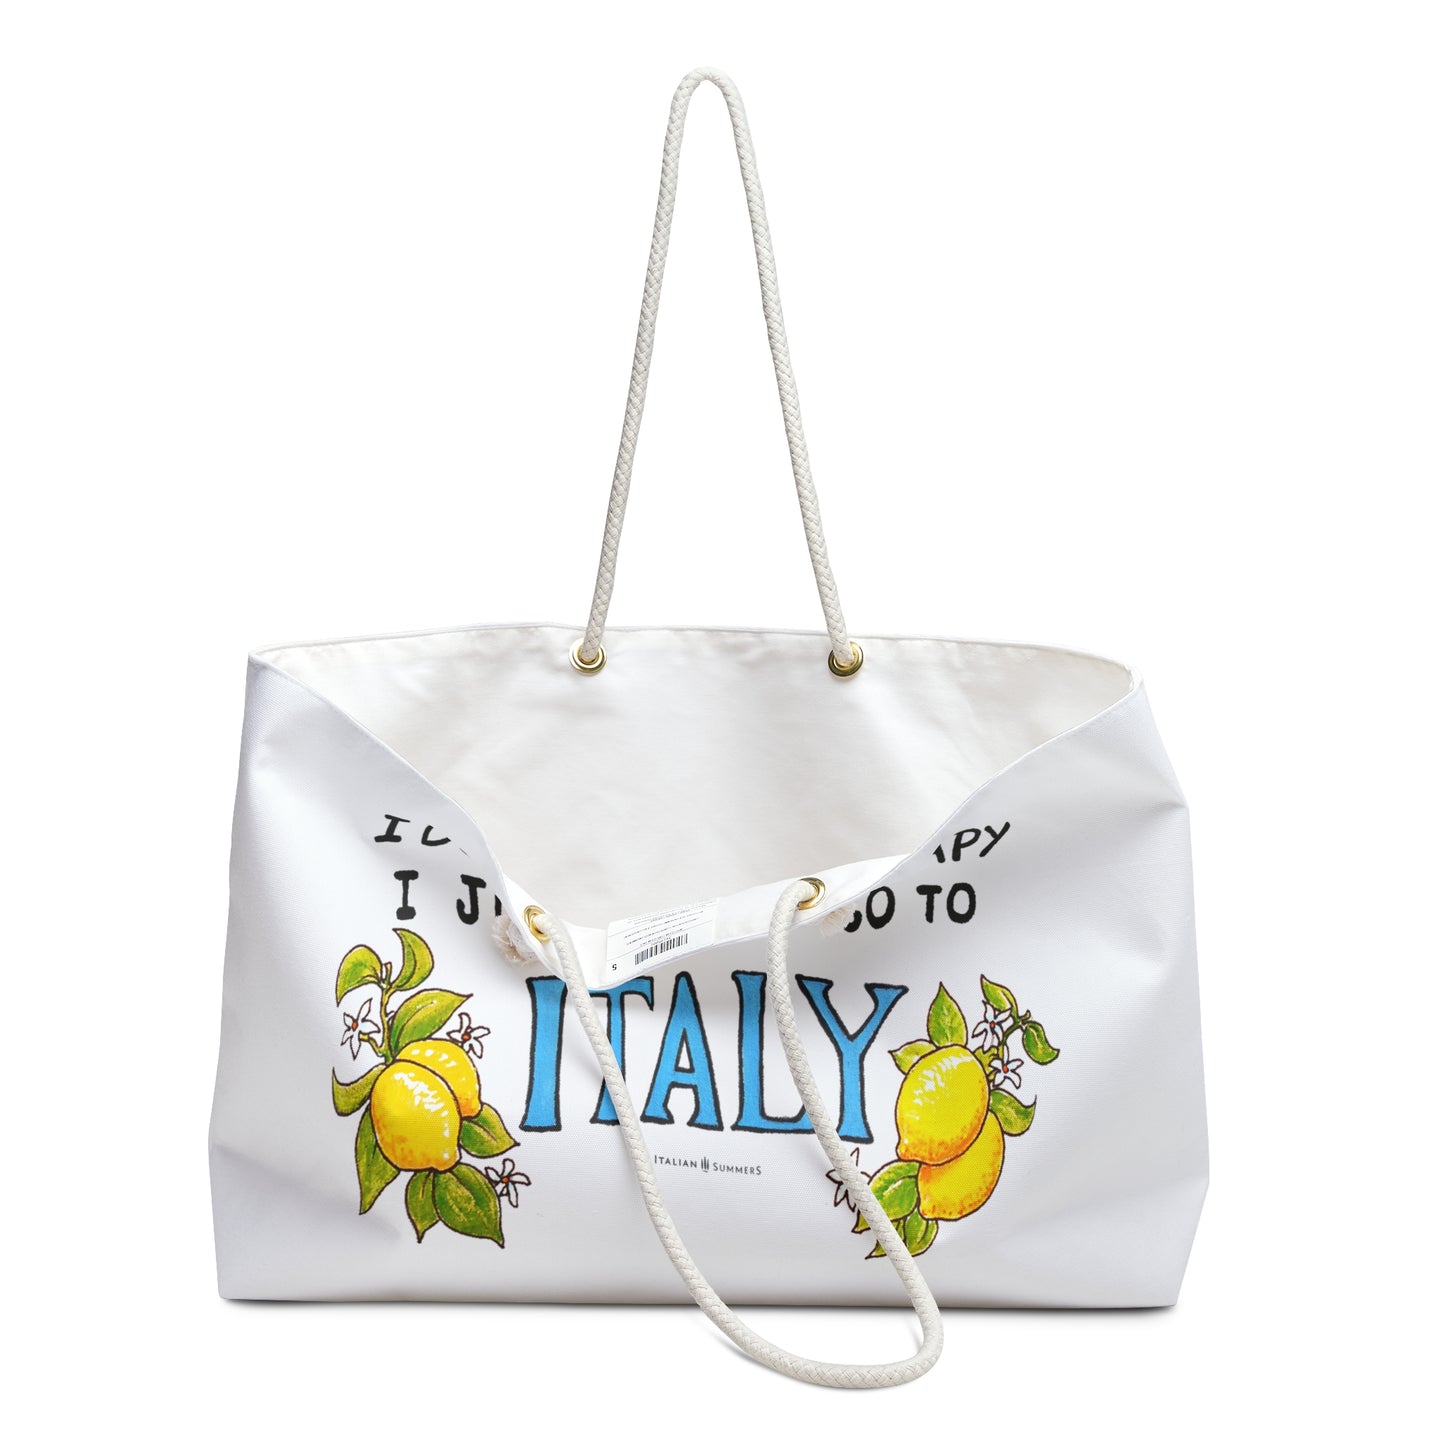 Italy inspired large beach bag with the quote I don't need therapy, I just need to go to Italy, with Italy in a blue hand writing. The Italy writing is decorated wirh amalfi Coast lemons on both sides. The beach bag has rope handles